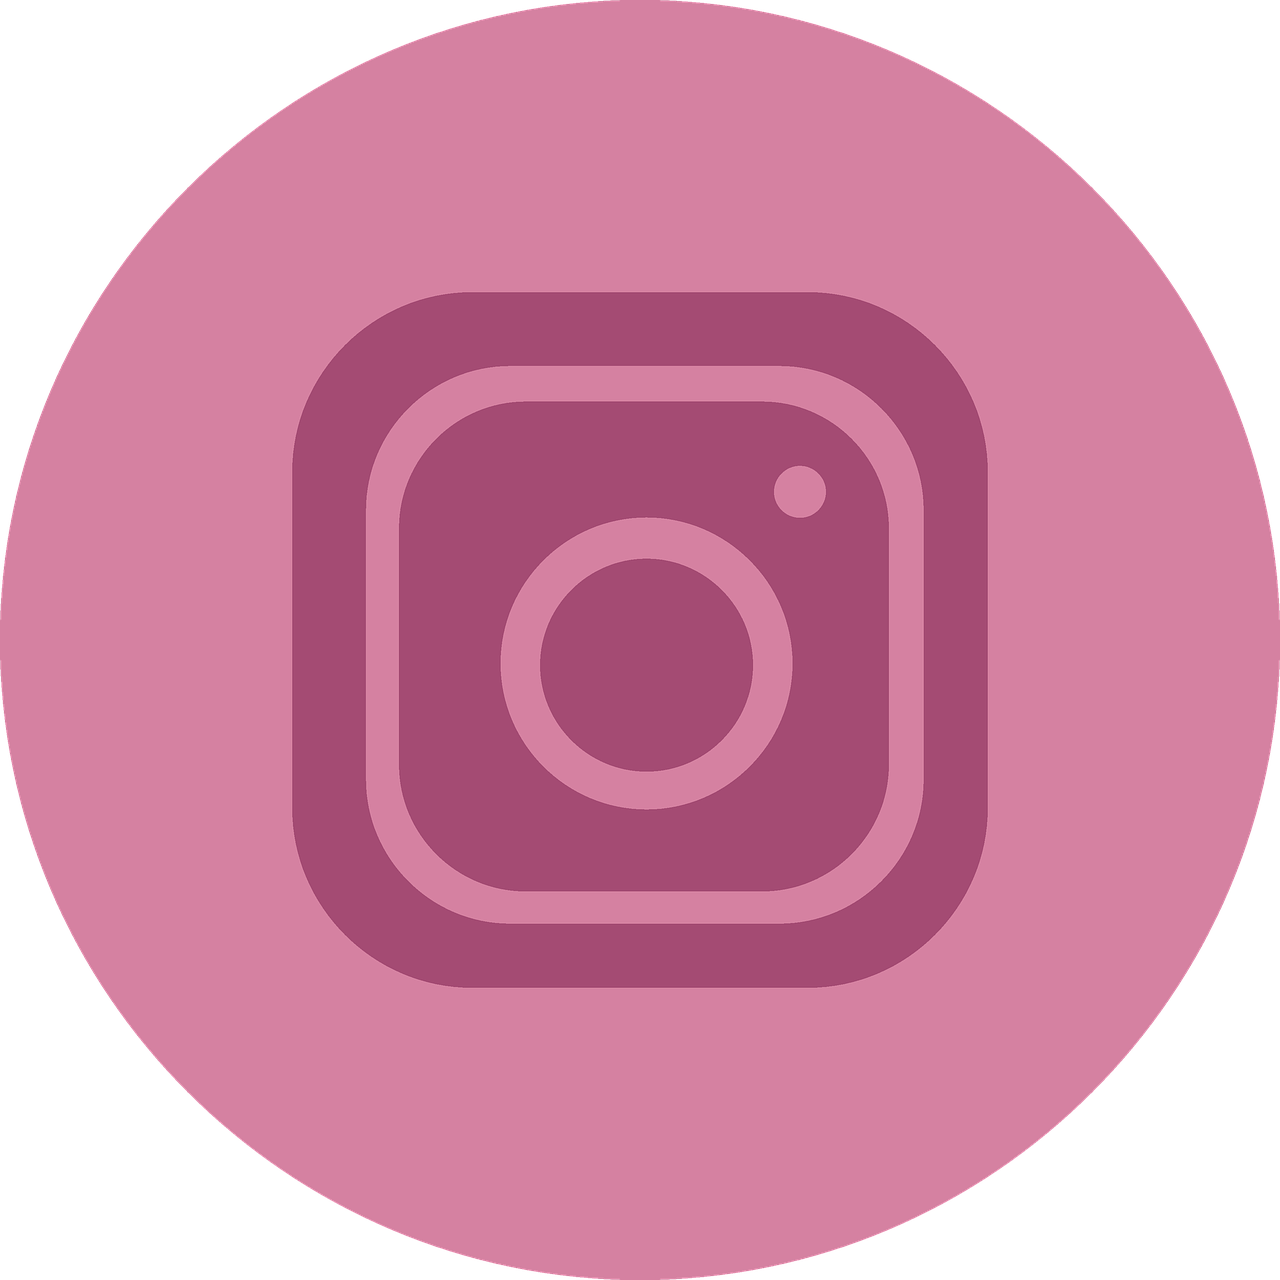 Instagram Icons Media University Computer Facebook Kaohsiung PNG Image